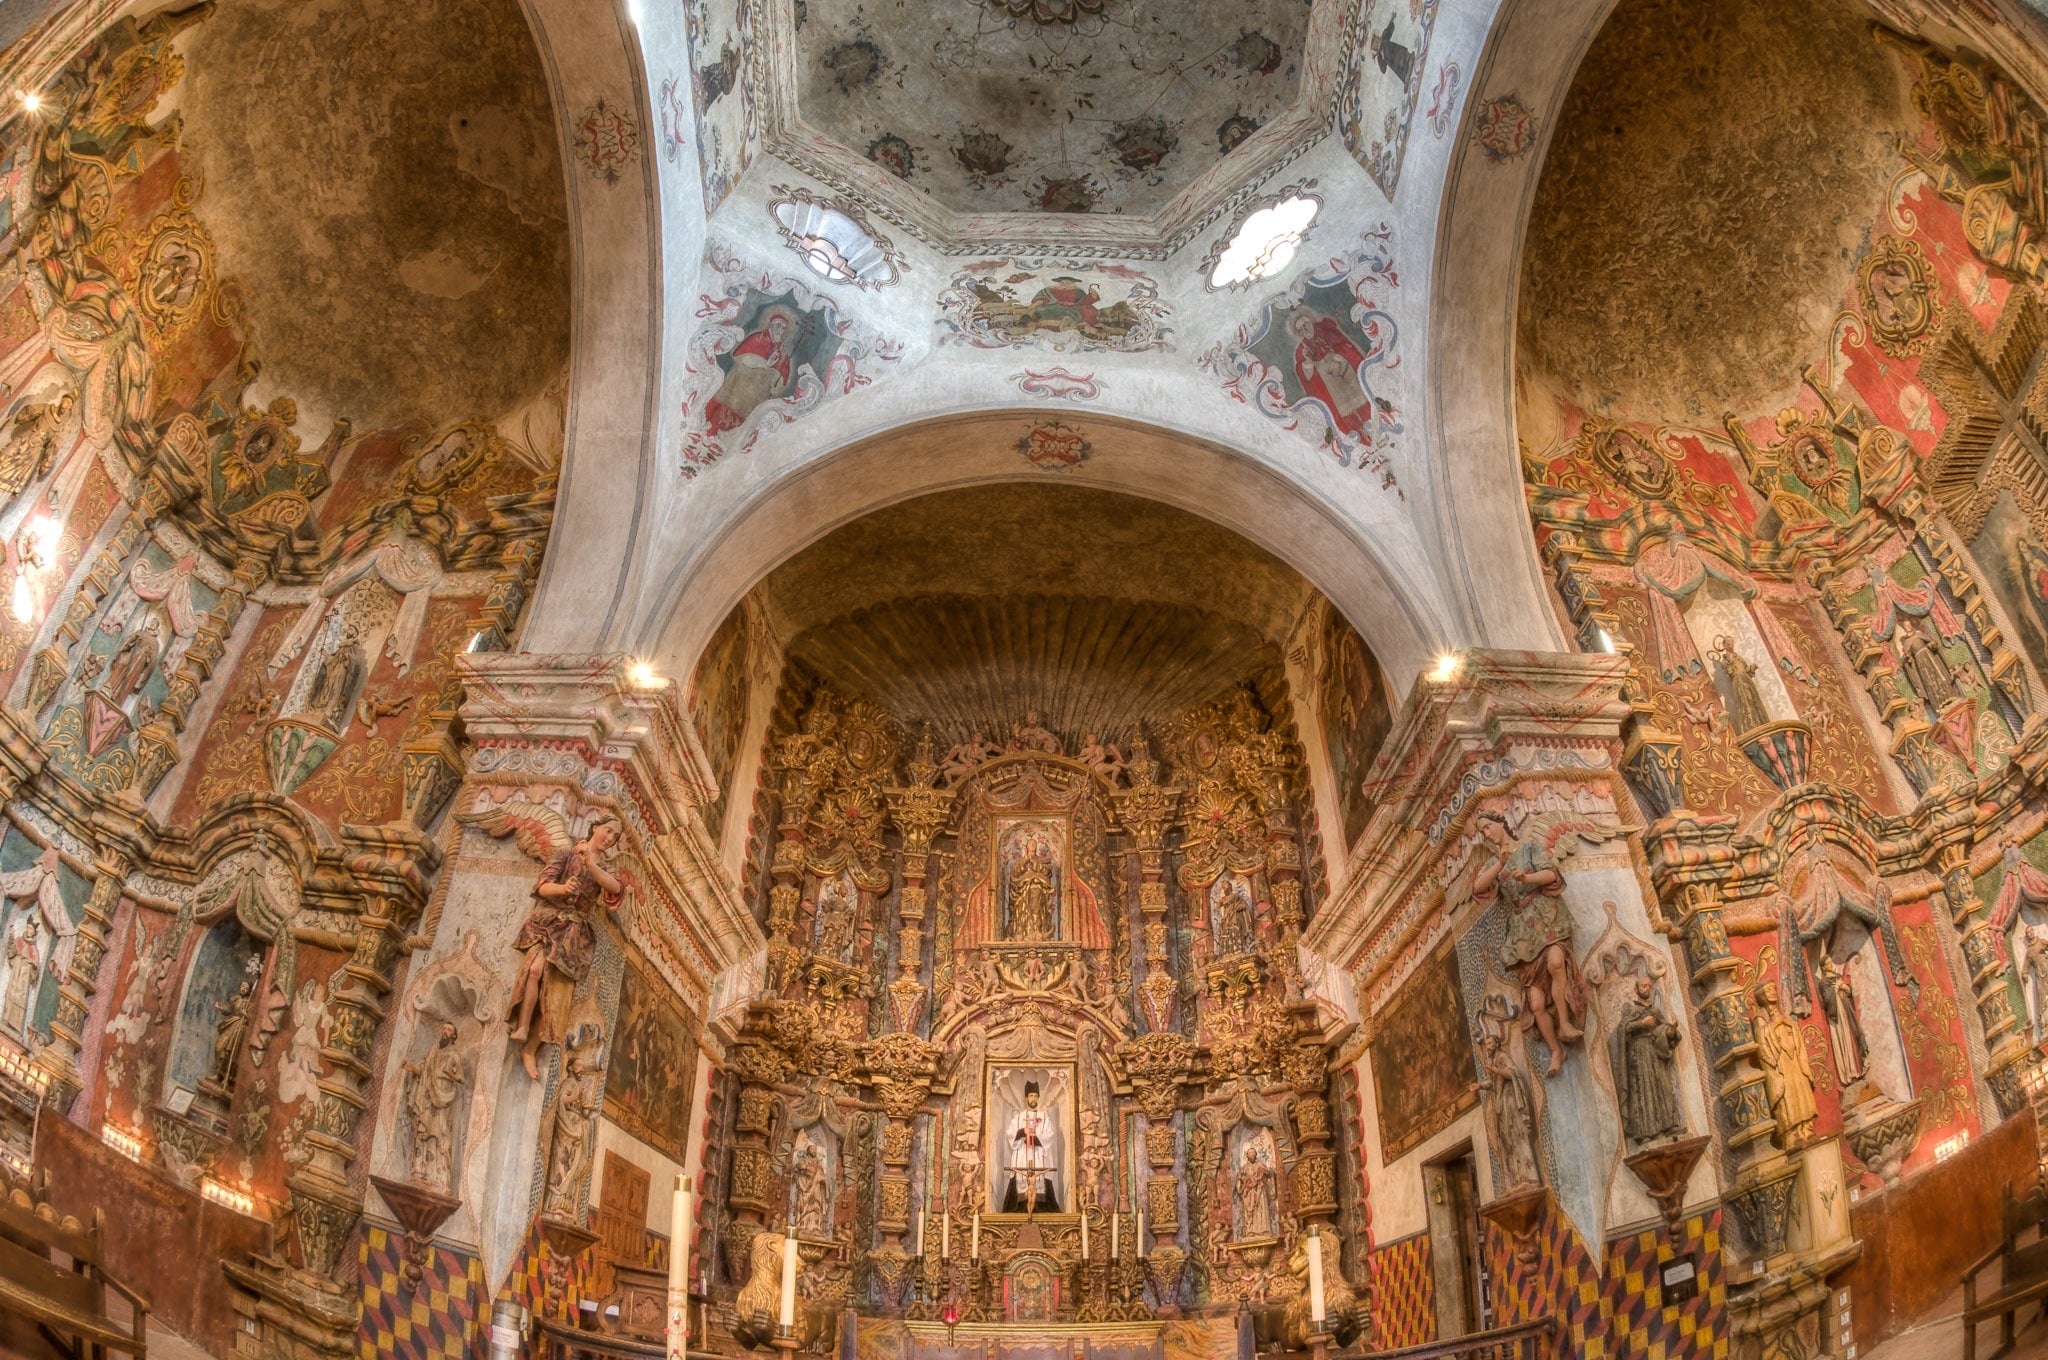 Altar of the San Xavier del Bac (White Dove of the Desert) church, located south of Tucson, Arizona.